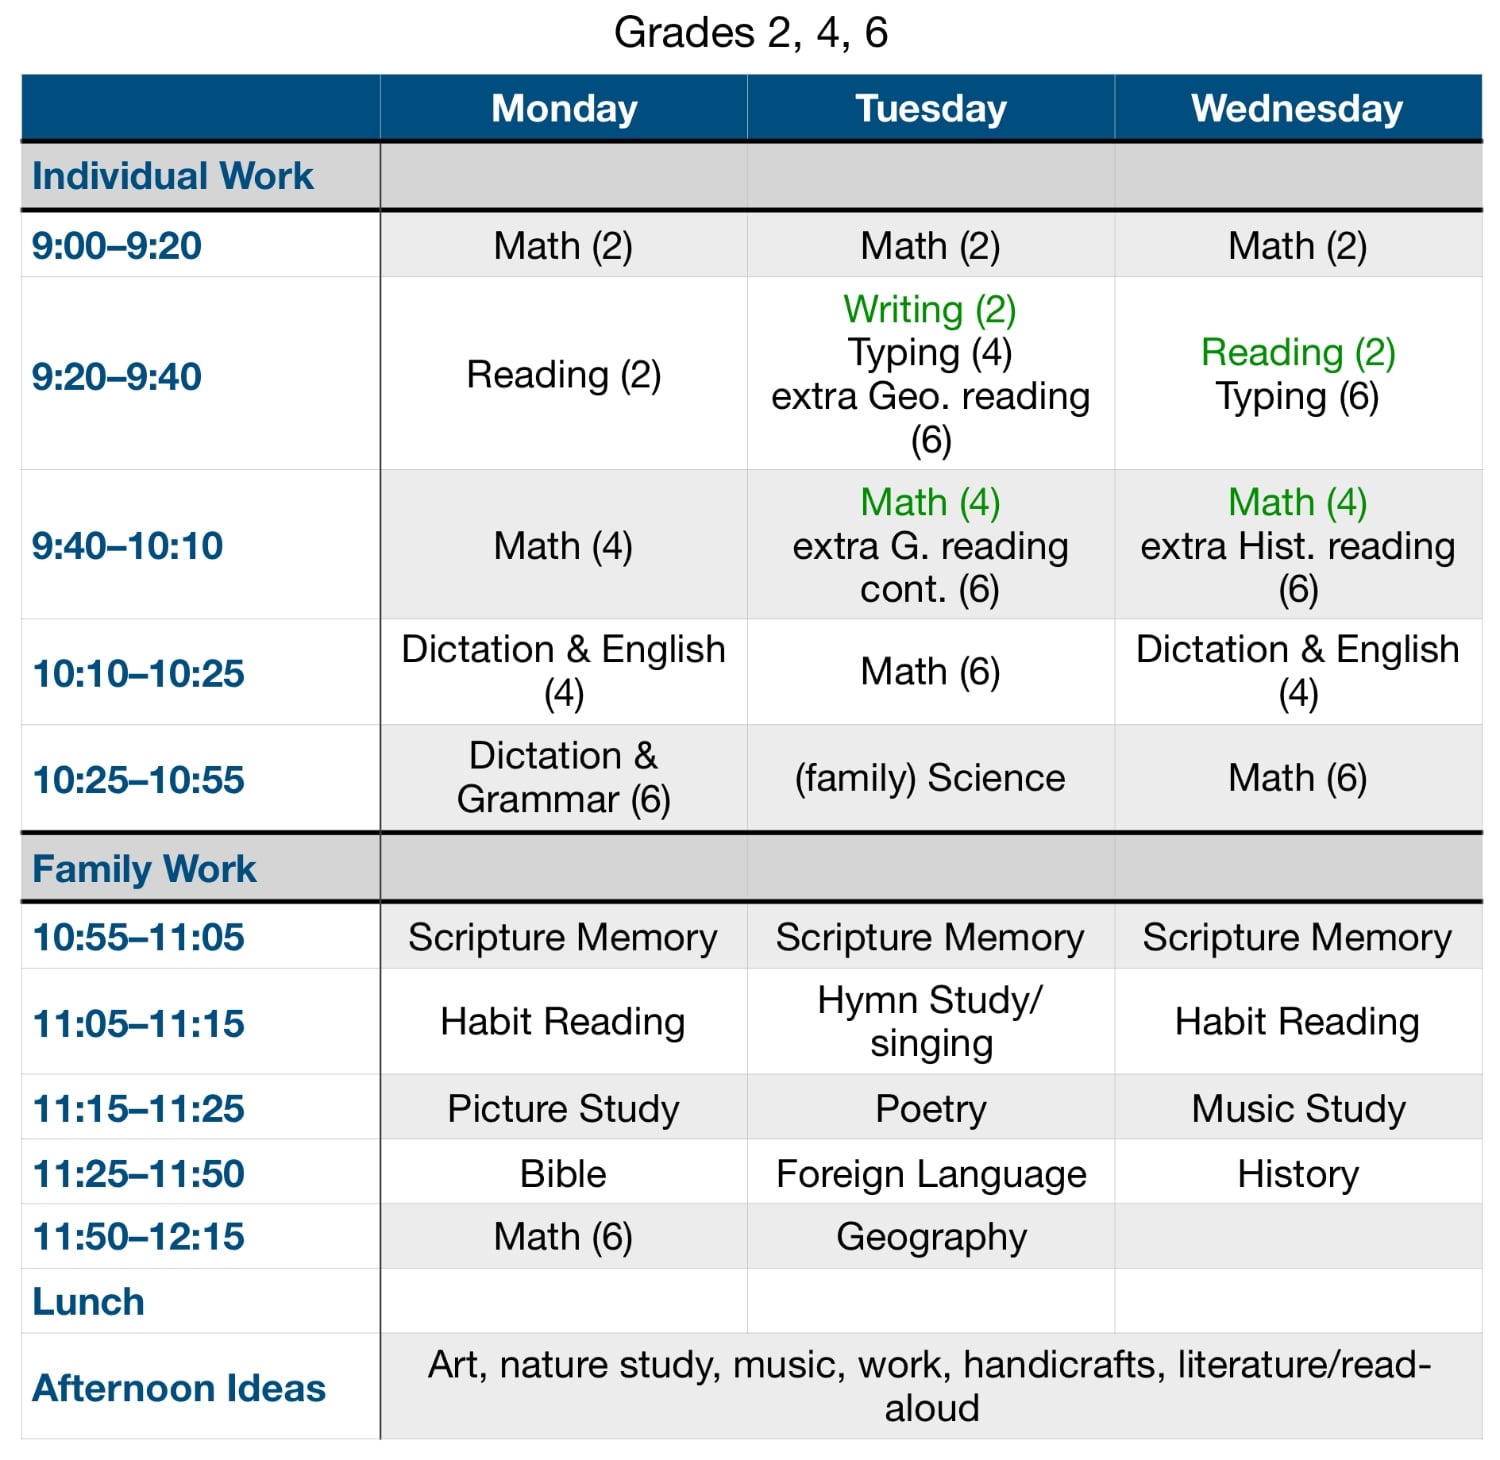 Sample Schedule Grade 2 and 4 and 6